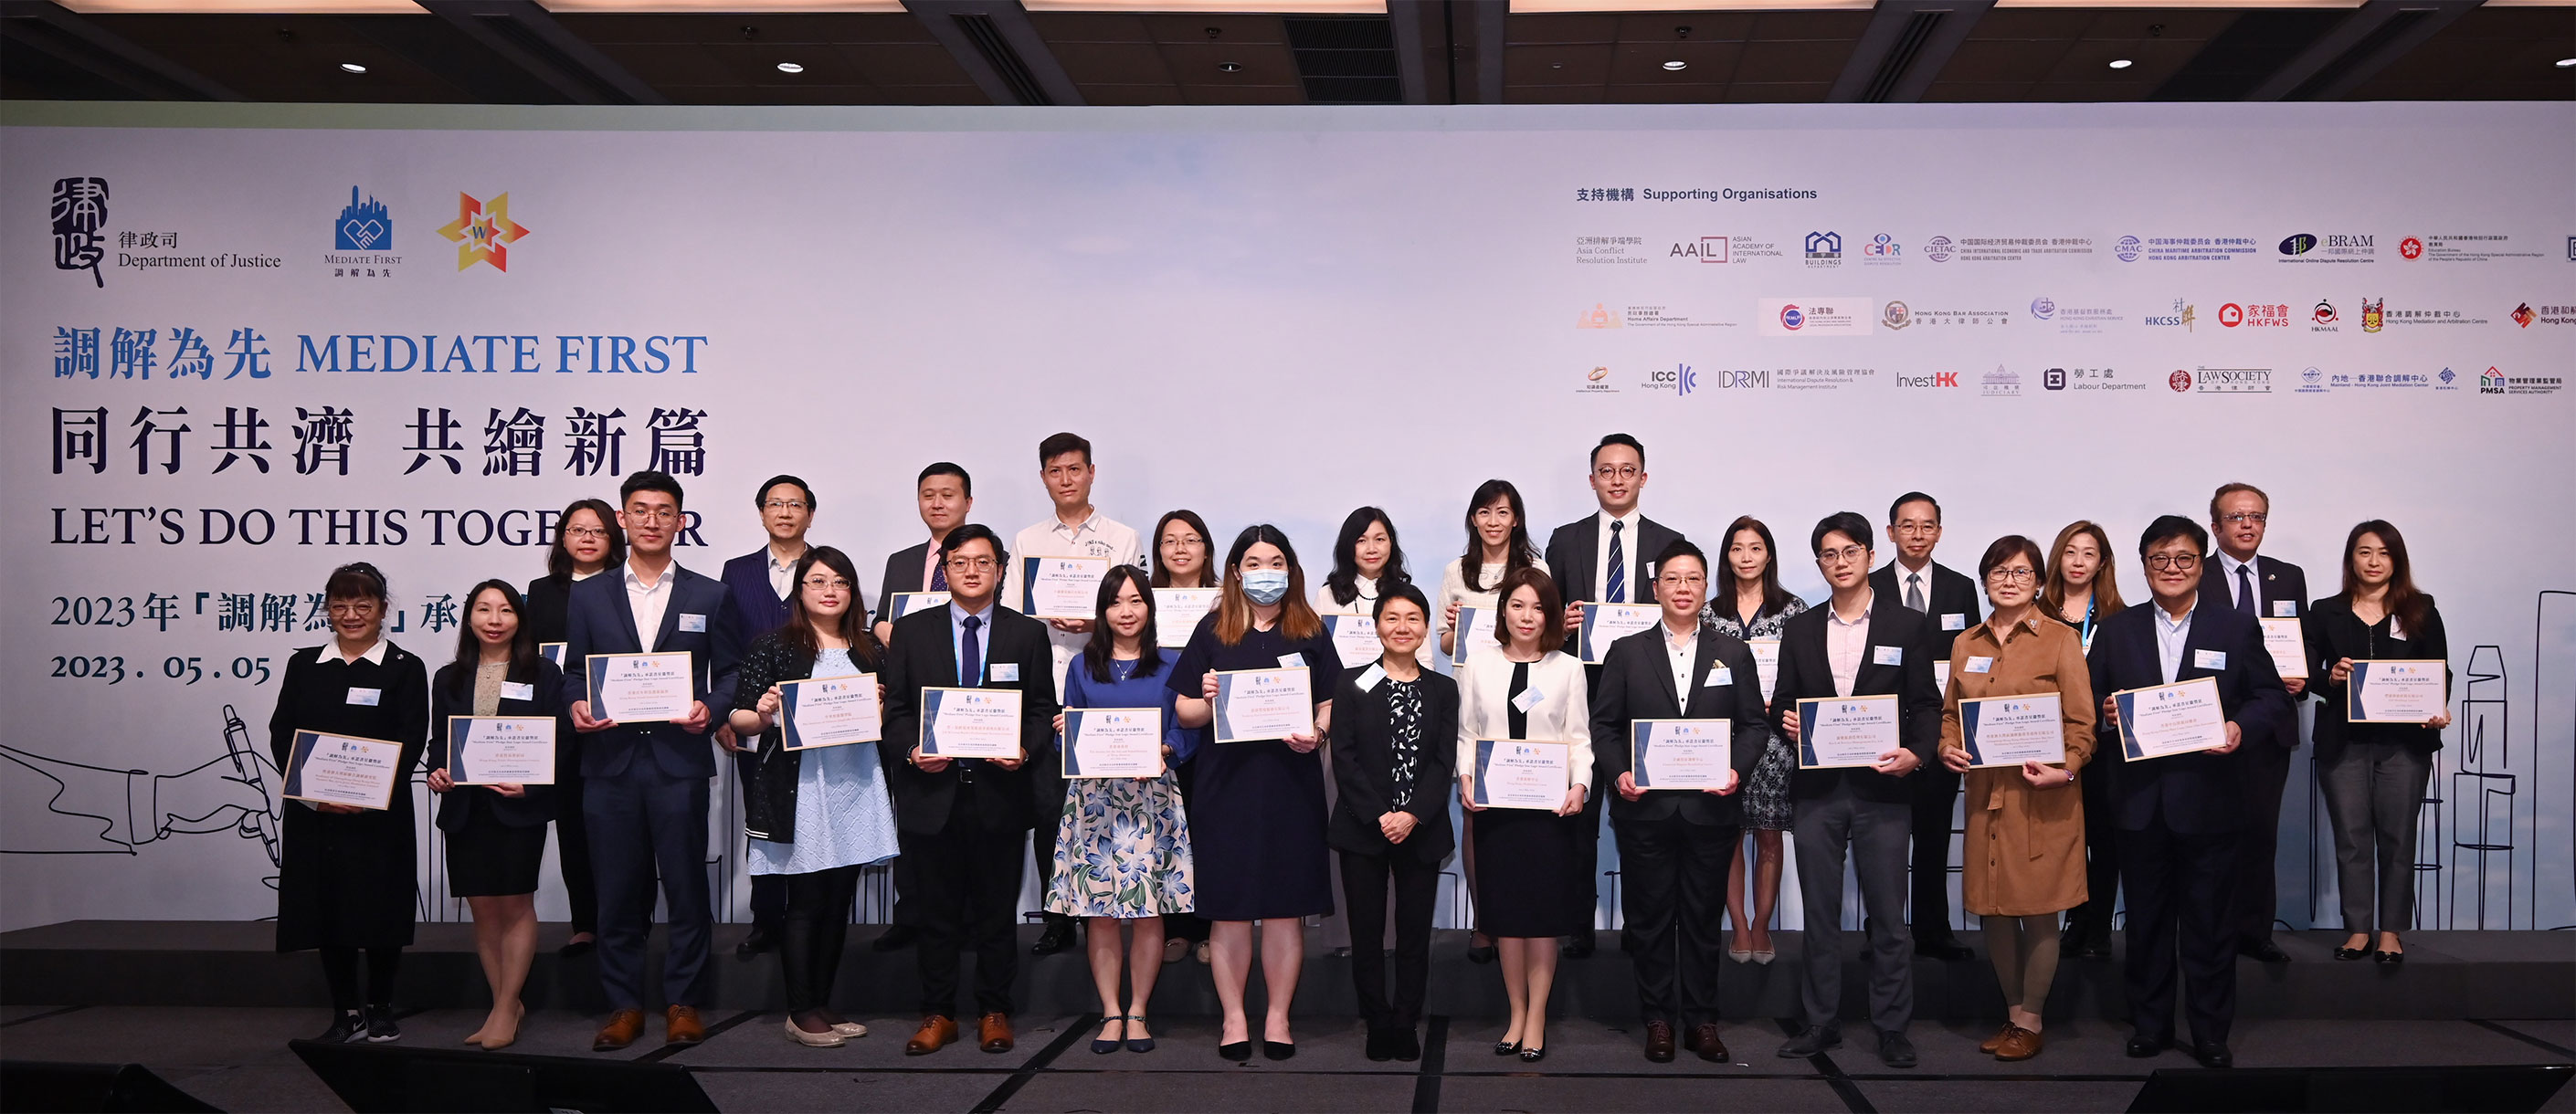 The biennial ”Mediate First”  Pledge Event organised by the Department of Justice (DoJ) was held today (May 5). Photo shows the Law Officer (Civil Law) of the DoJ, Ms Christina Cheung (front row, sixth right), presenting awards at the Star Logo Award Presentation Ceremony.